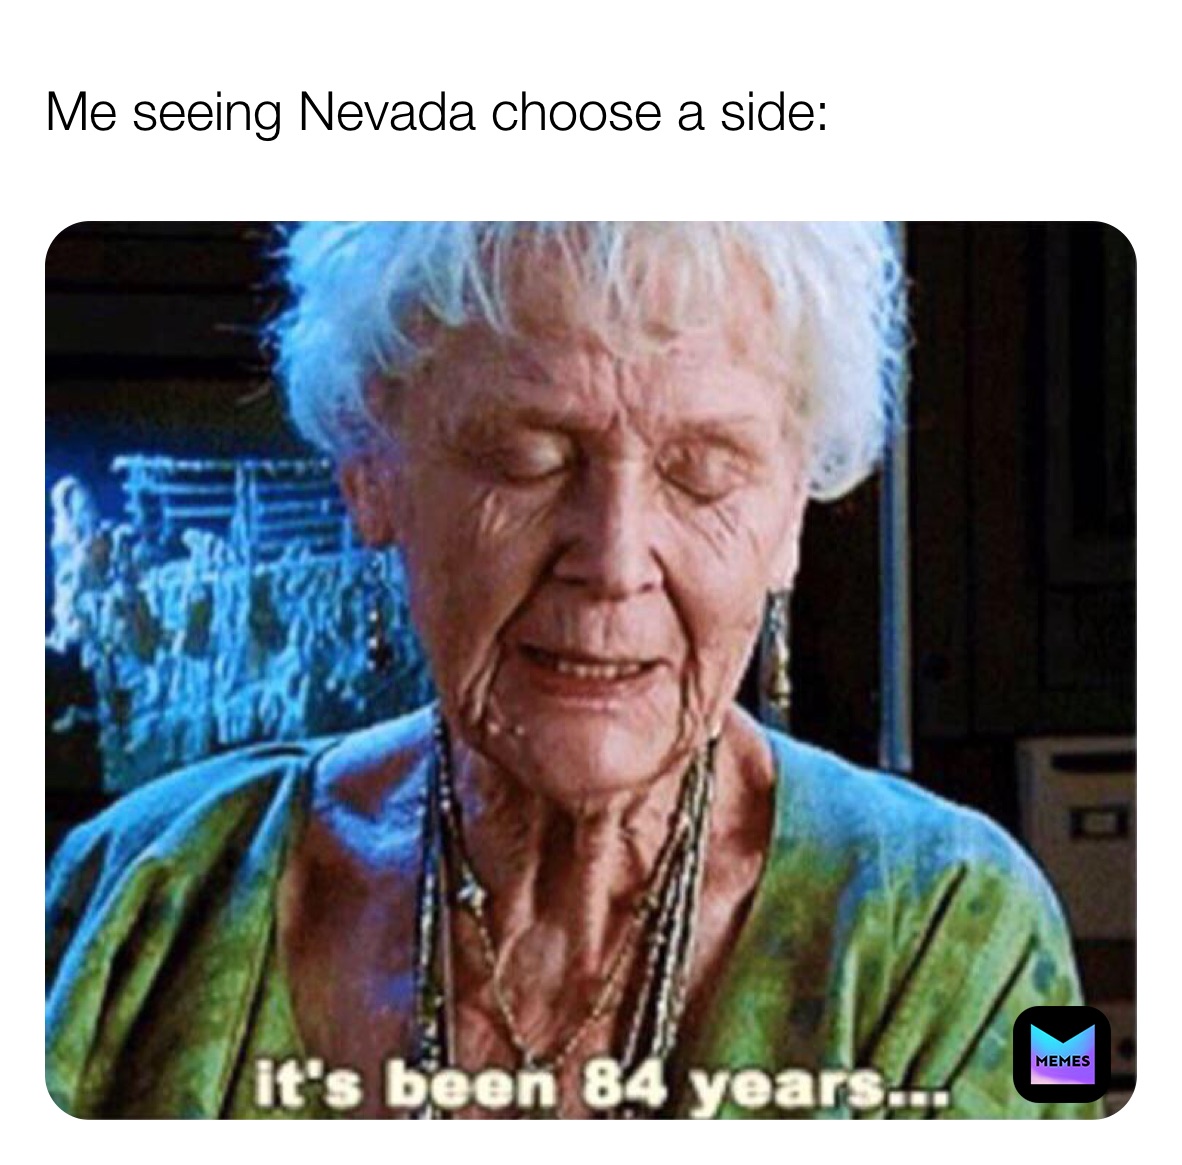 Me seeing Nevada choose a side: